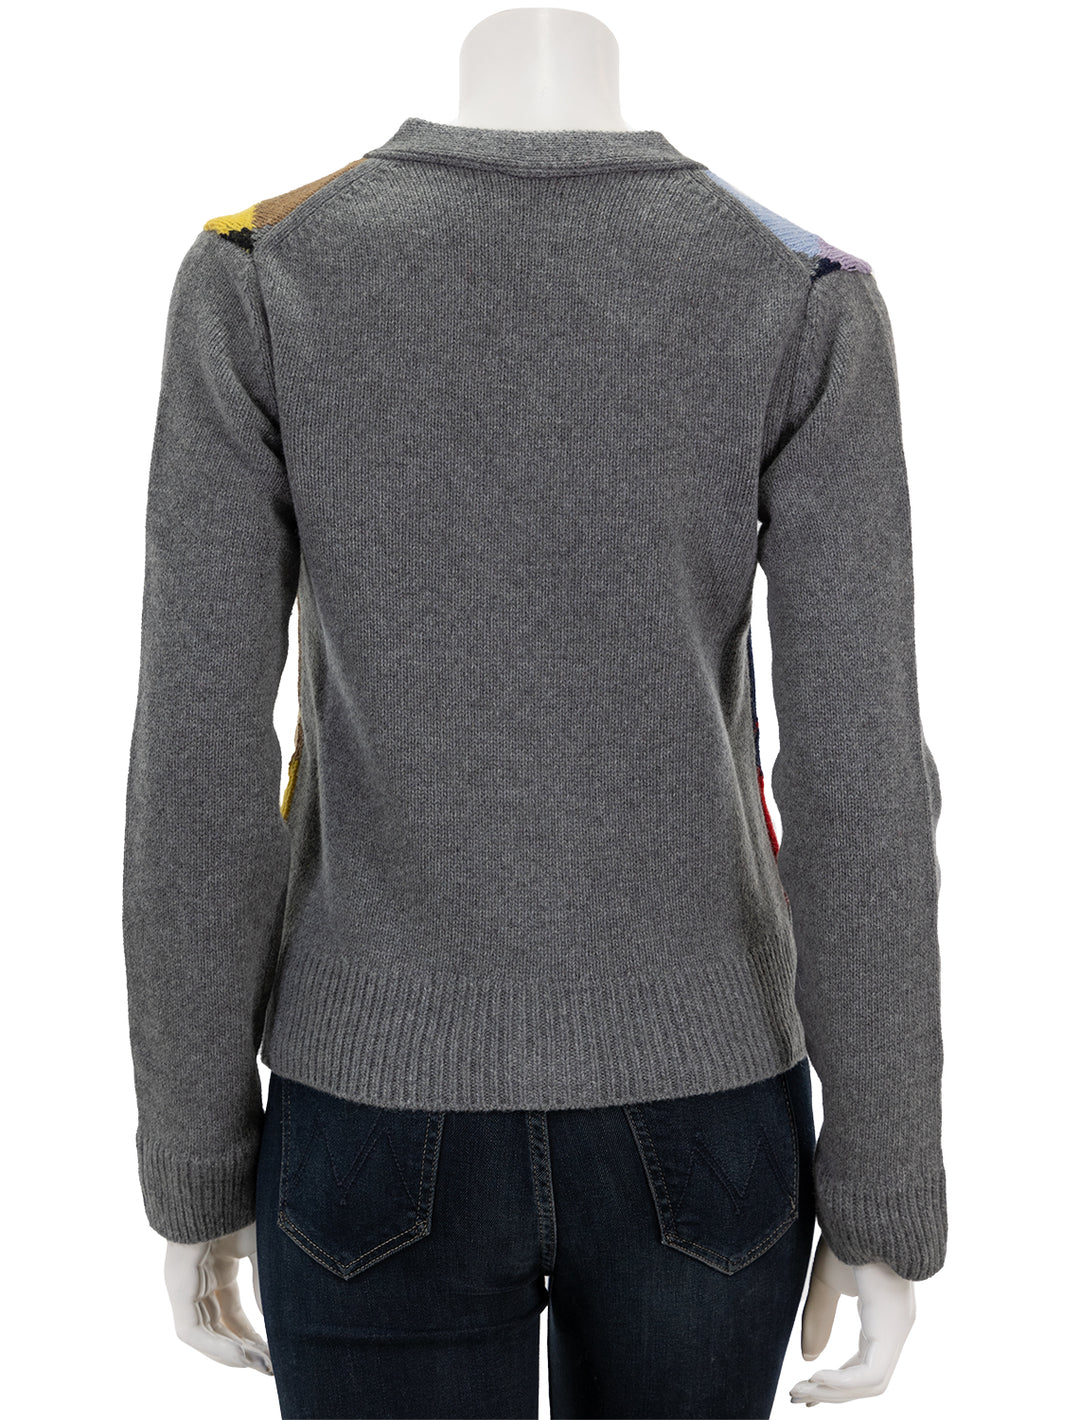 Back view of GANNI's harlequin wool cardigan in frost grey.